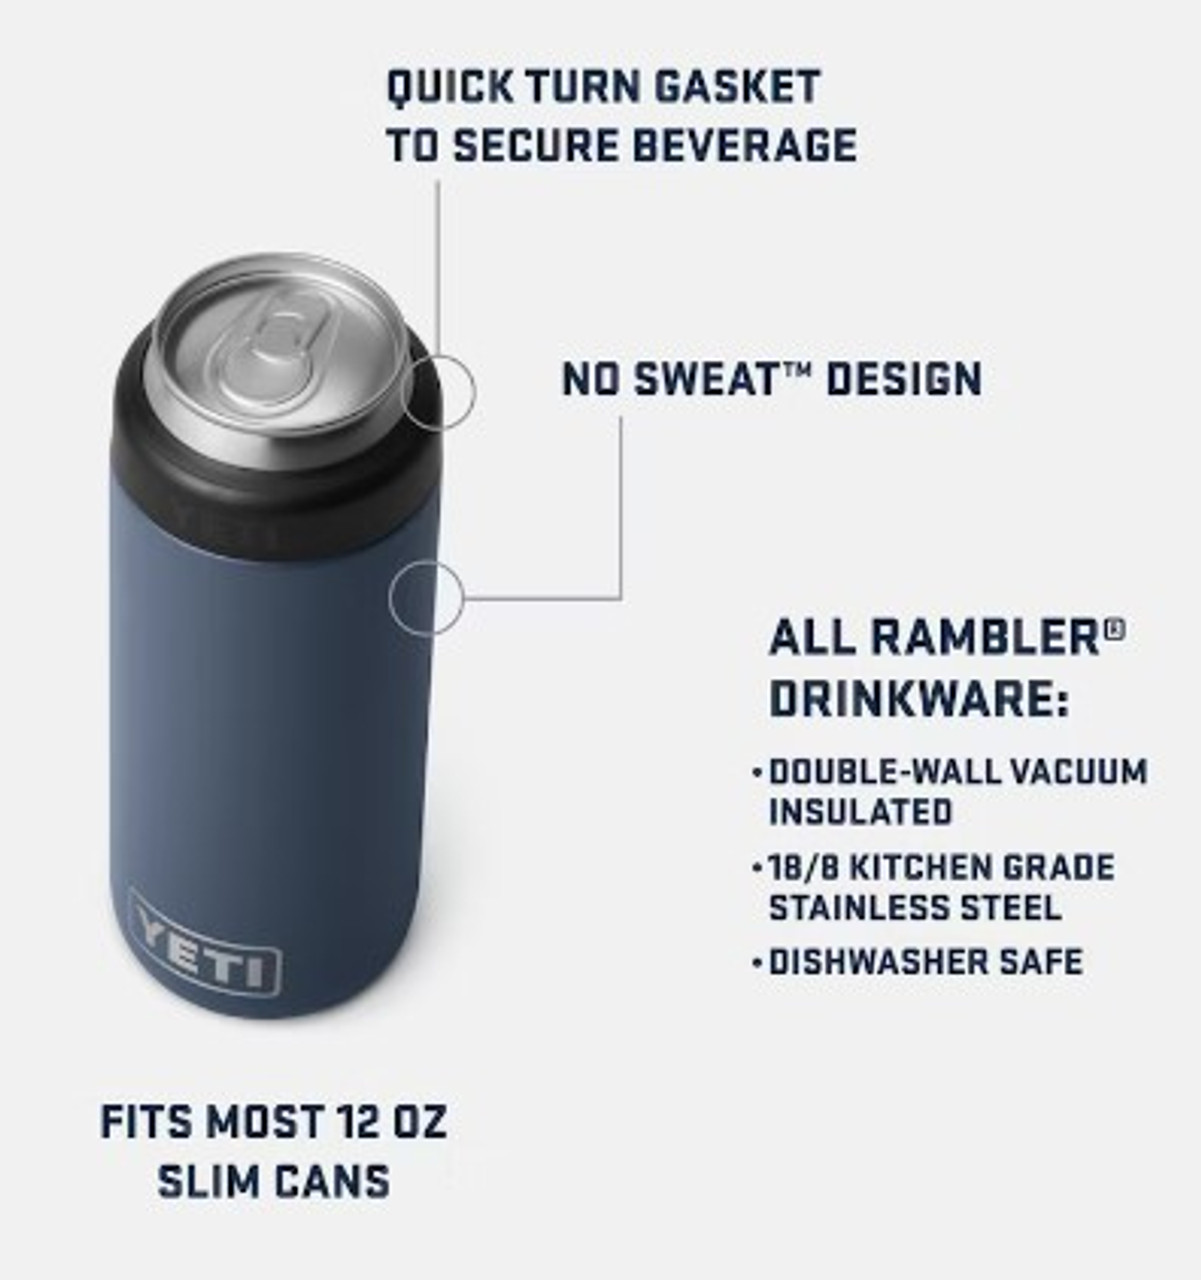 YETI - Rambler 12 oz Colster Slim Can Cooler - Offshore Blue